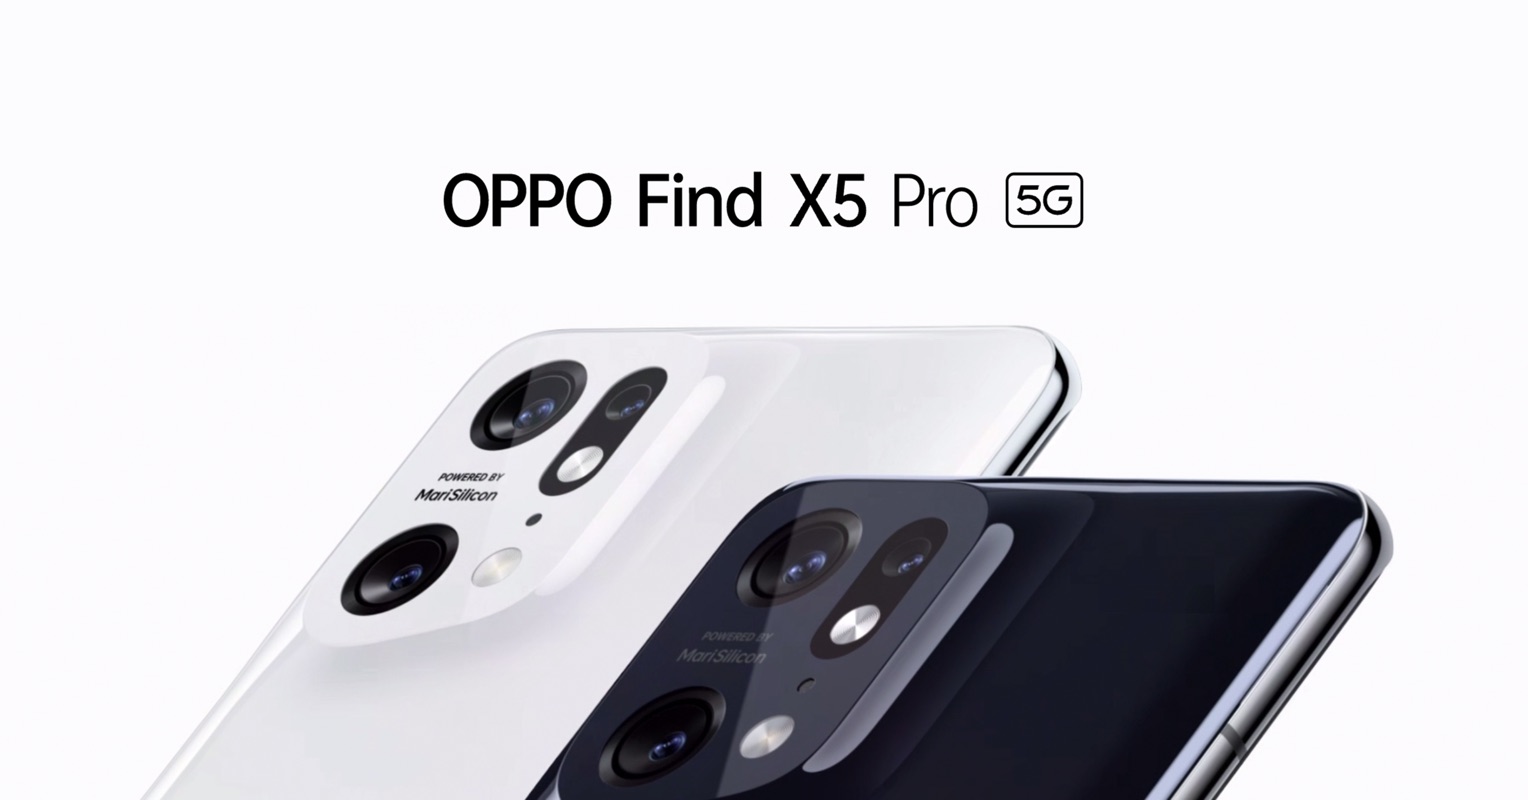  Find X5 Pro 5G white and black Colour